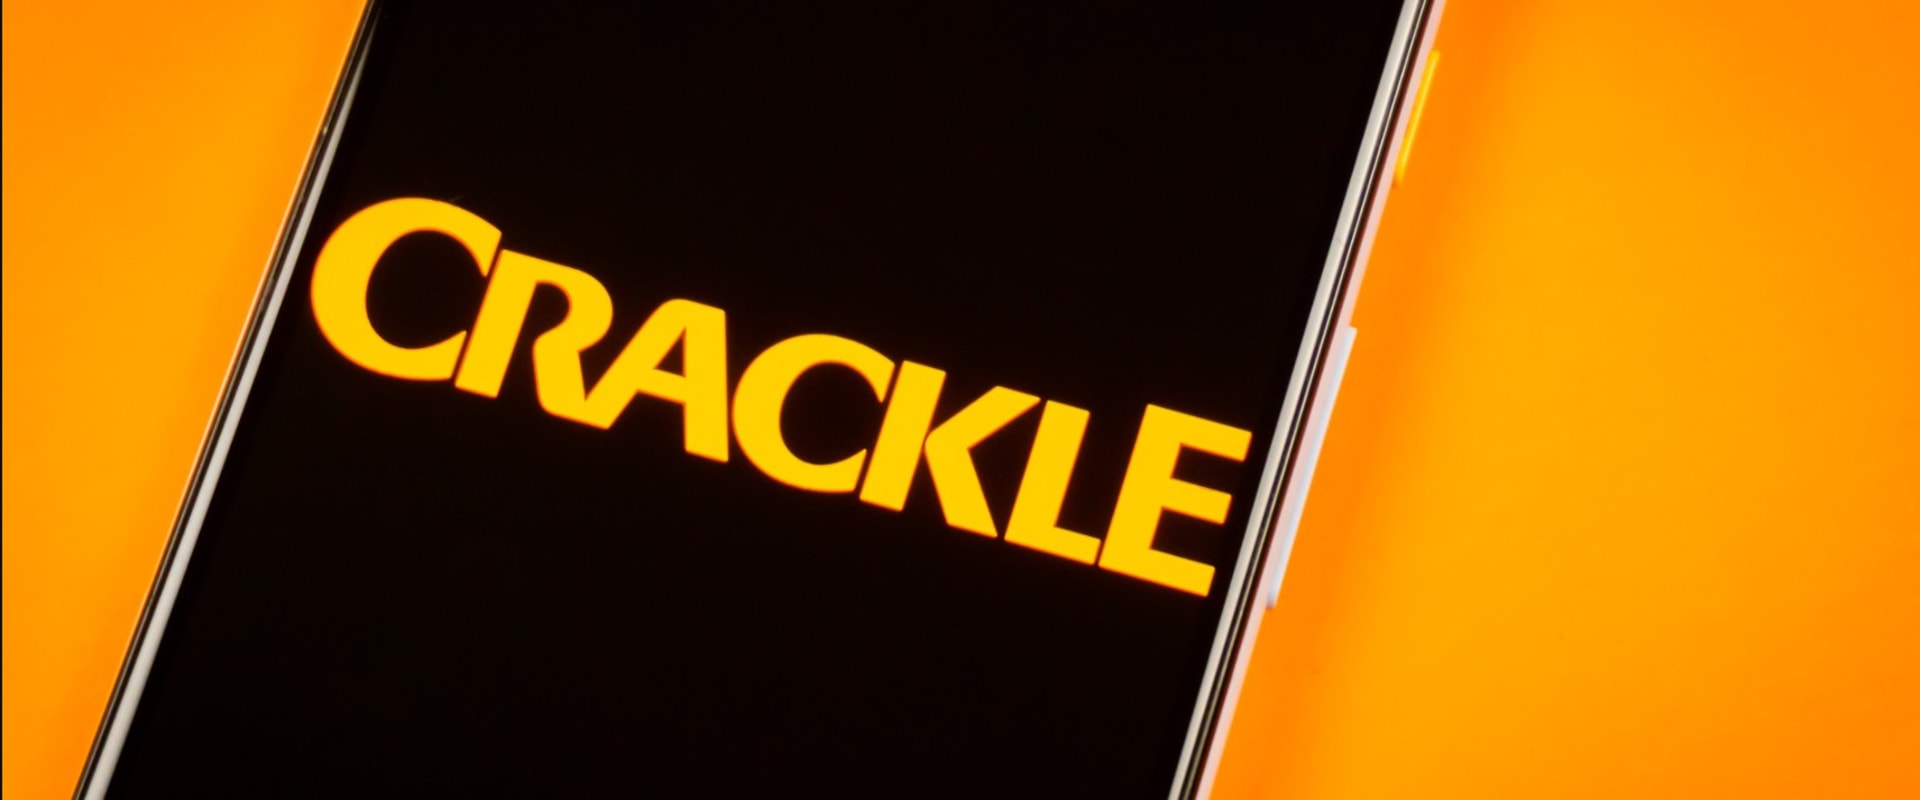 Everything You Need to Know About Crackle: A Free Streaming Service